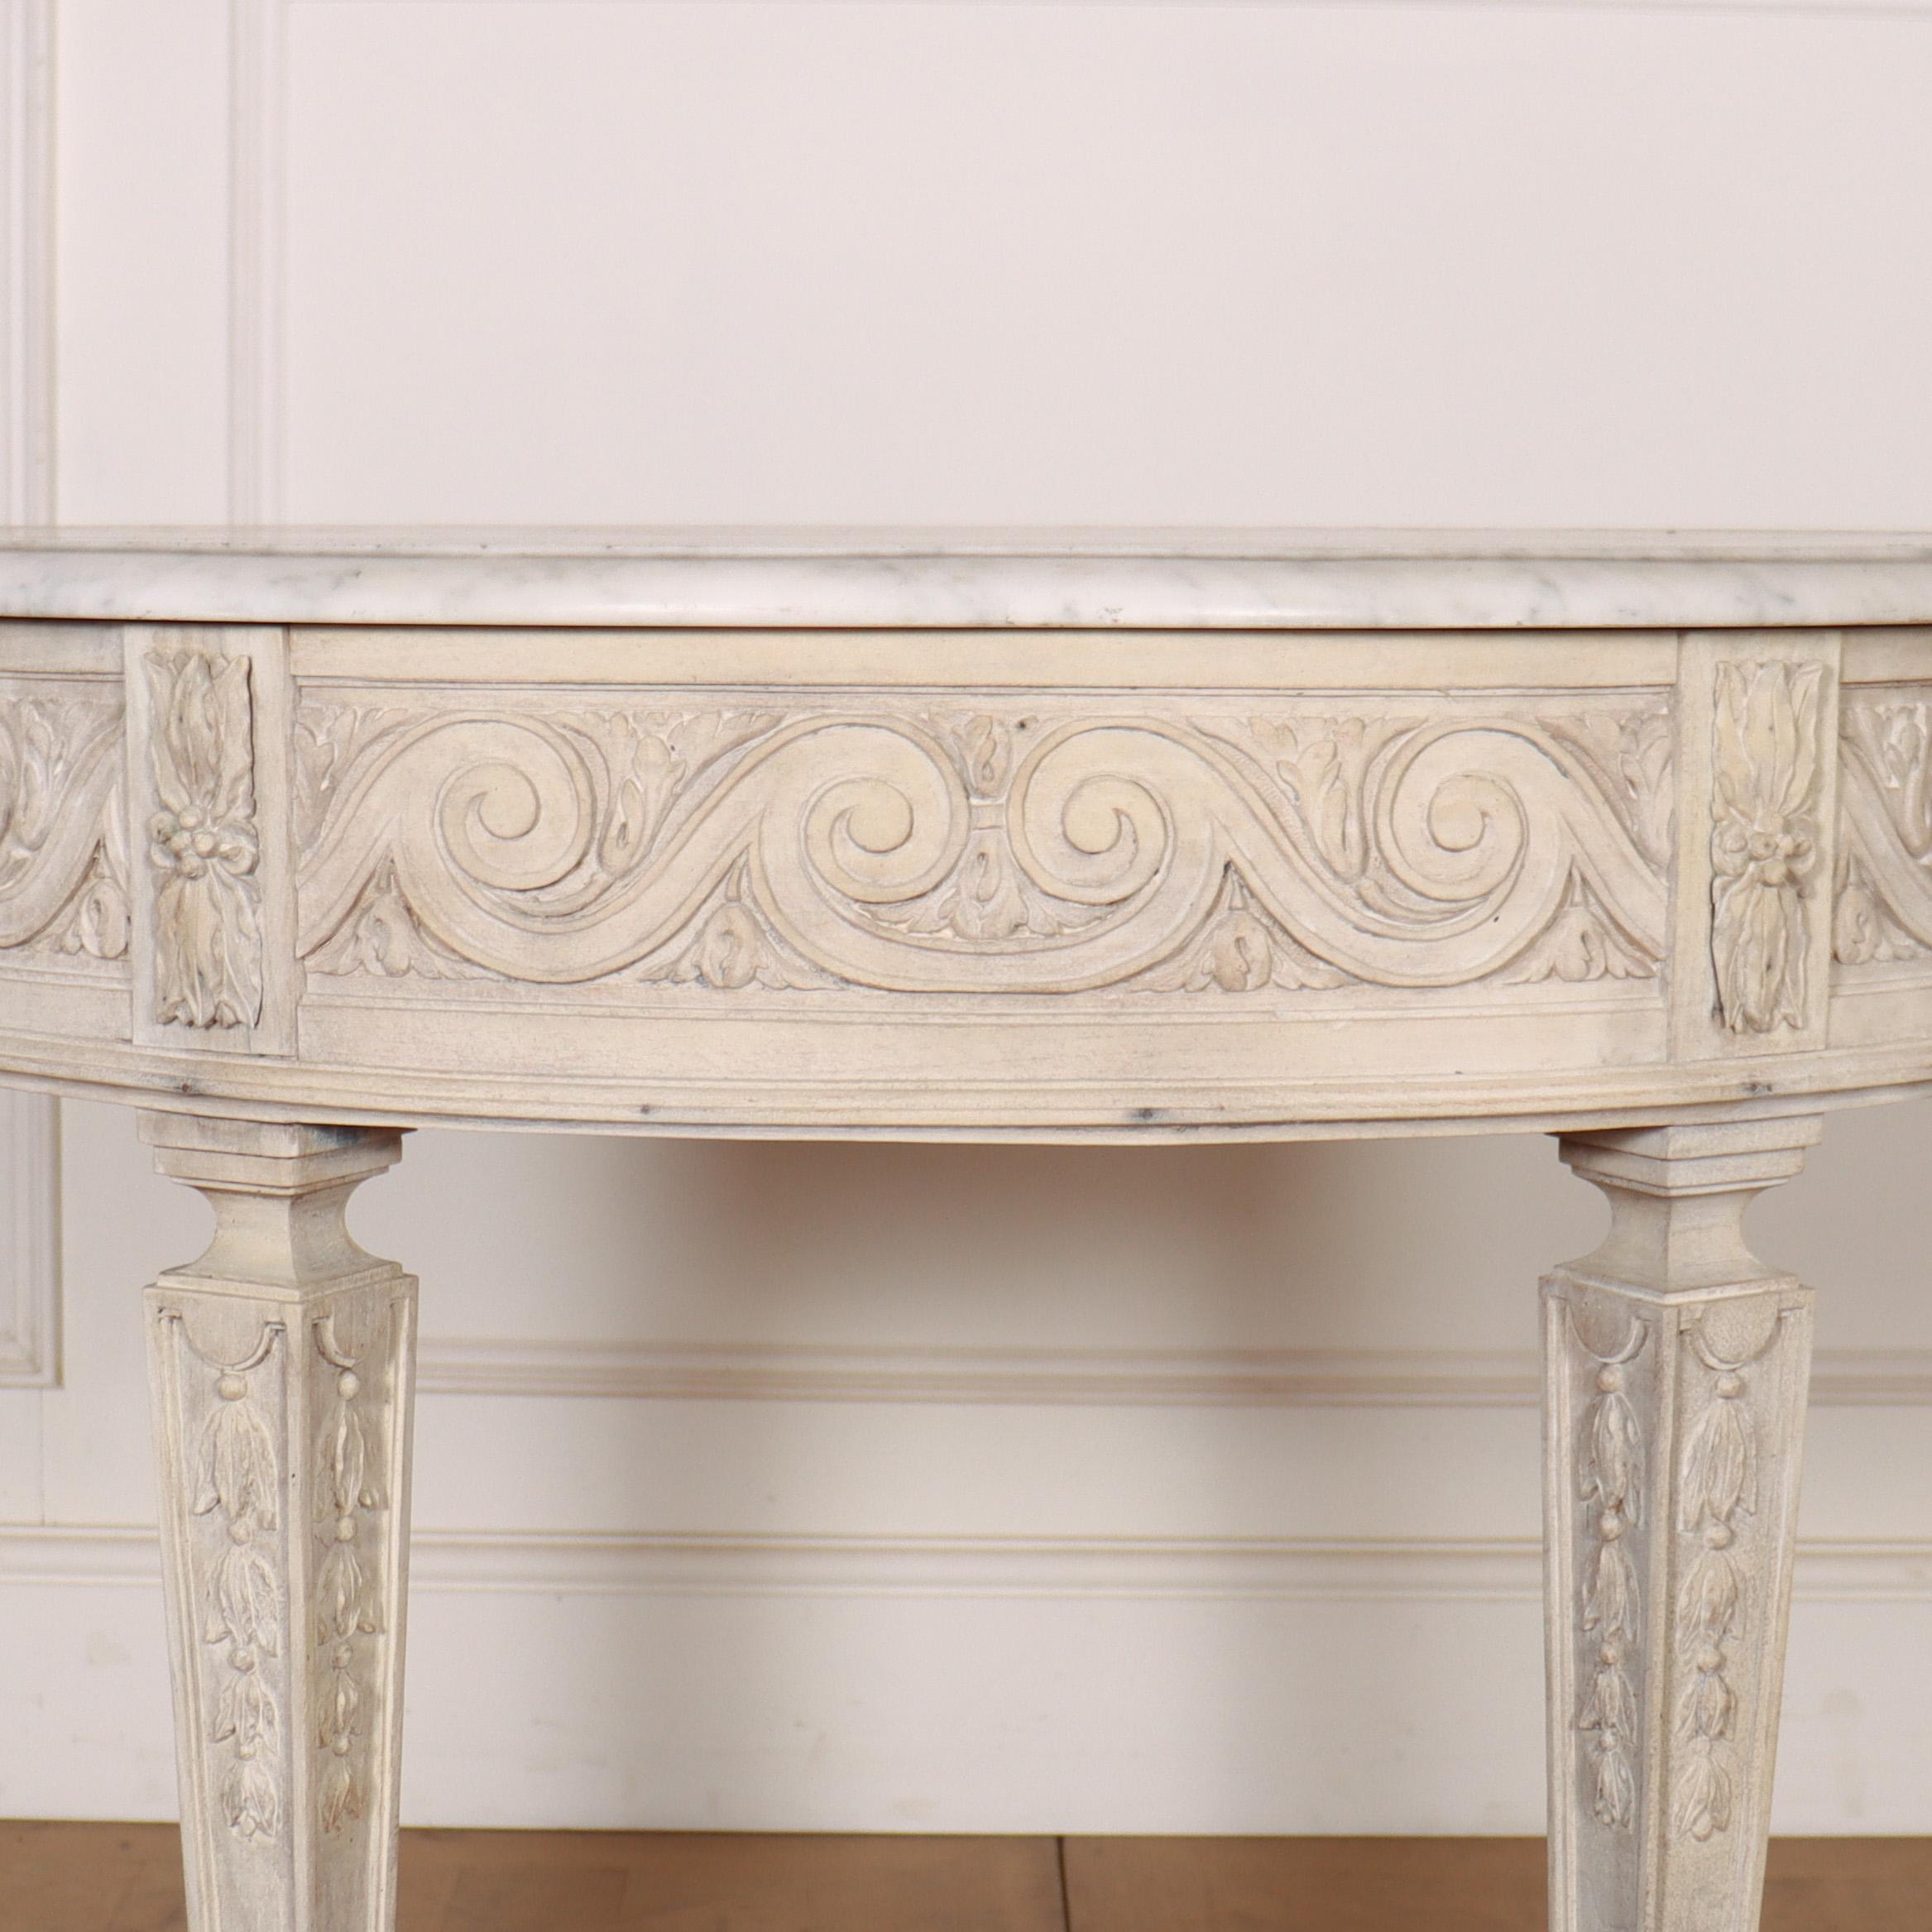 Pretty 18th C English carved and bleached walnut demi lune console table with a marble top. 1790.

Reference: 8012

Dimensions
34.5 inches (88 cms) Wide
19 inches (48 cms) Deep
29.5 inches (75 cms) High